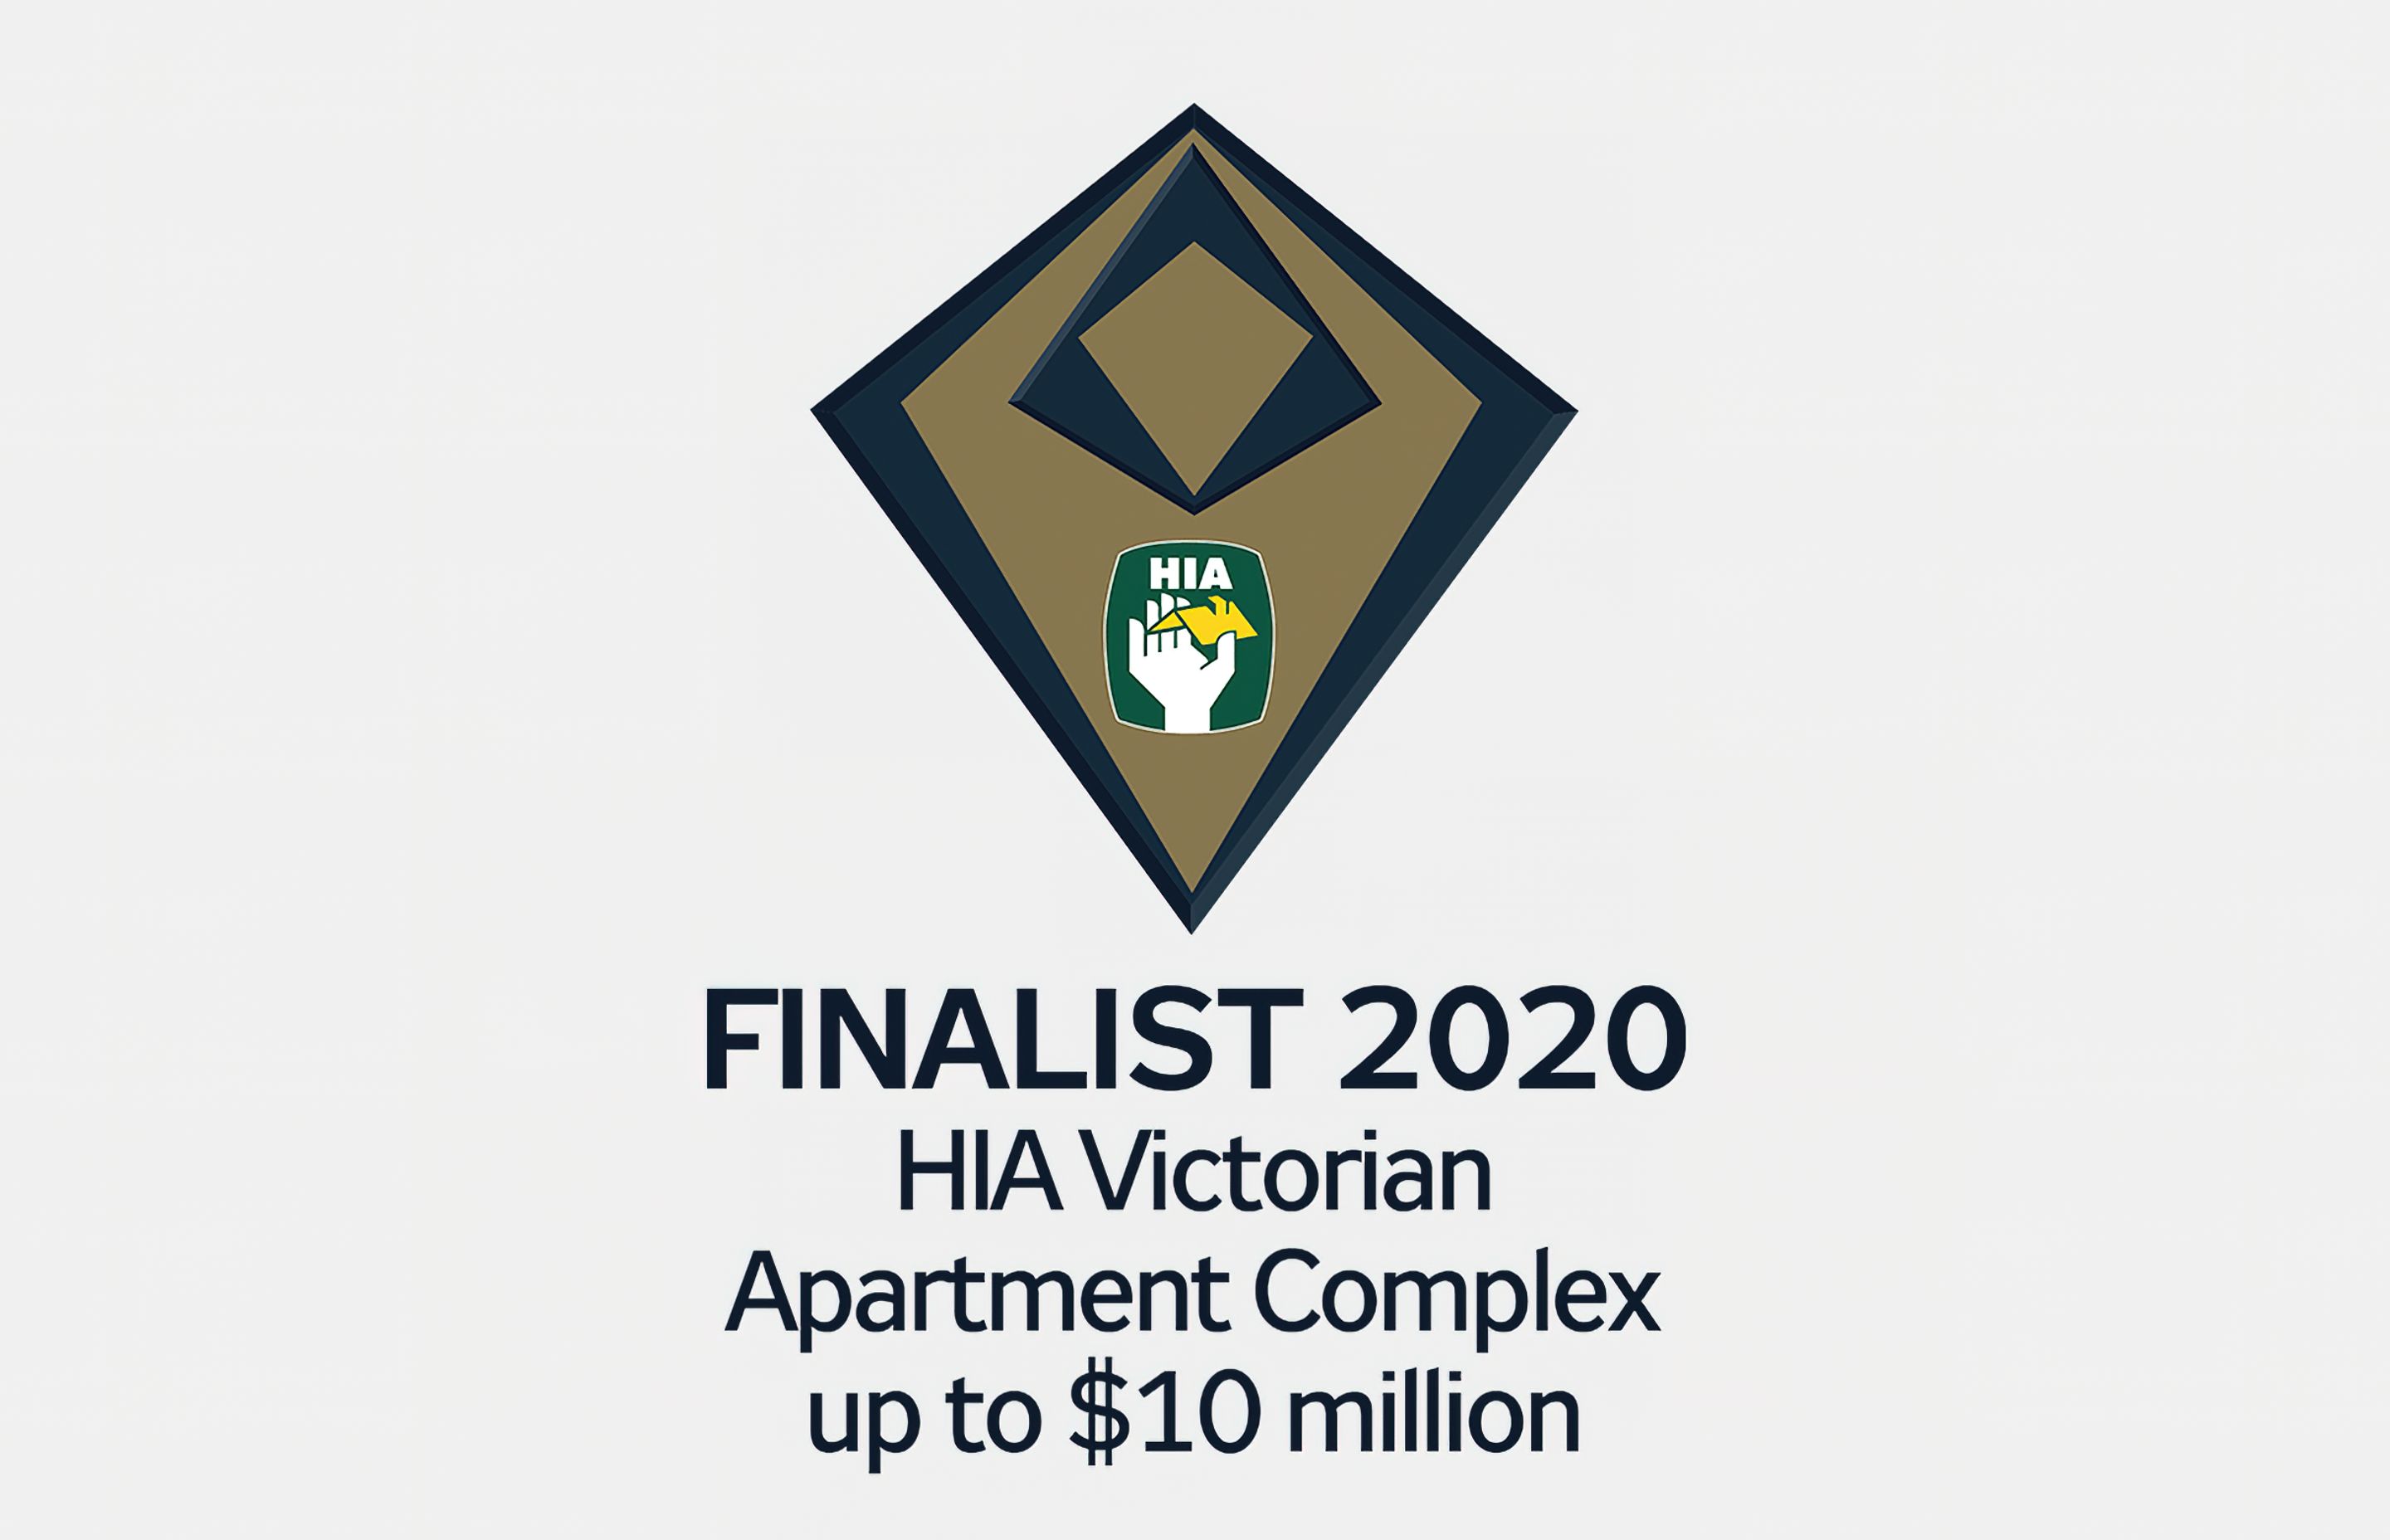 AG Construct announced as a finalist in the 2020 HIA Victorian awards for Apartment Complex up to $10 Million